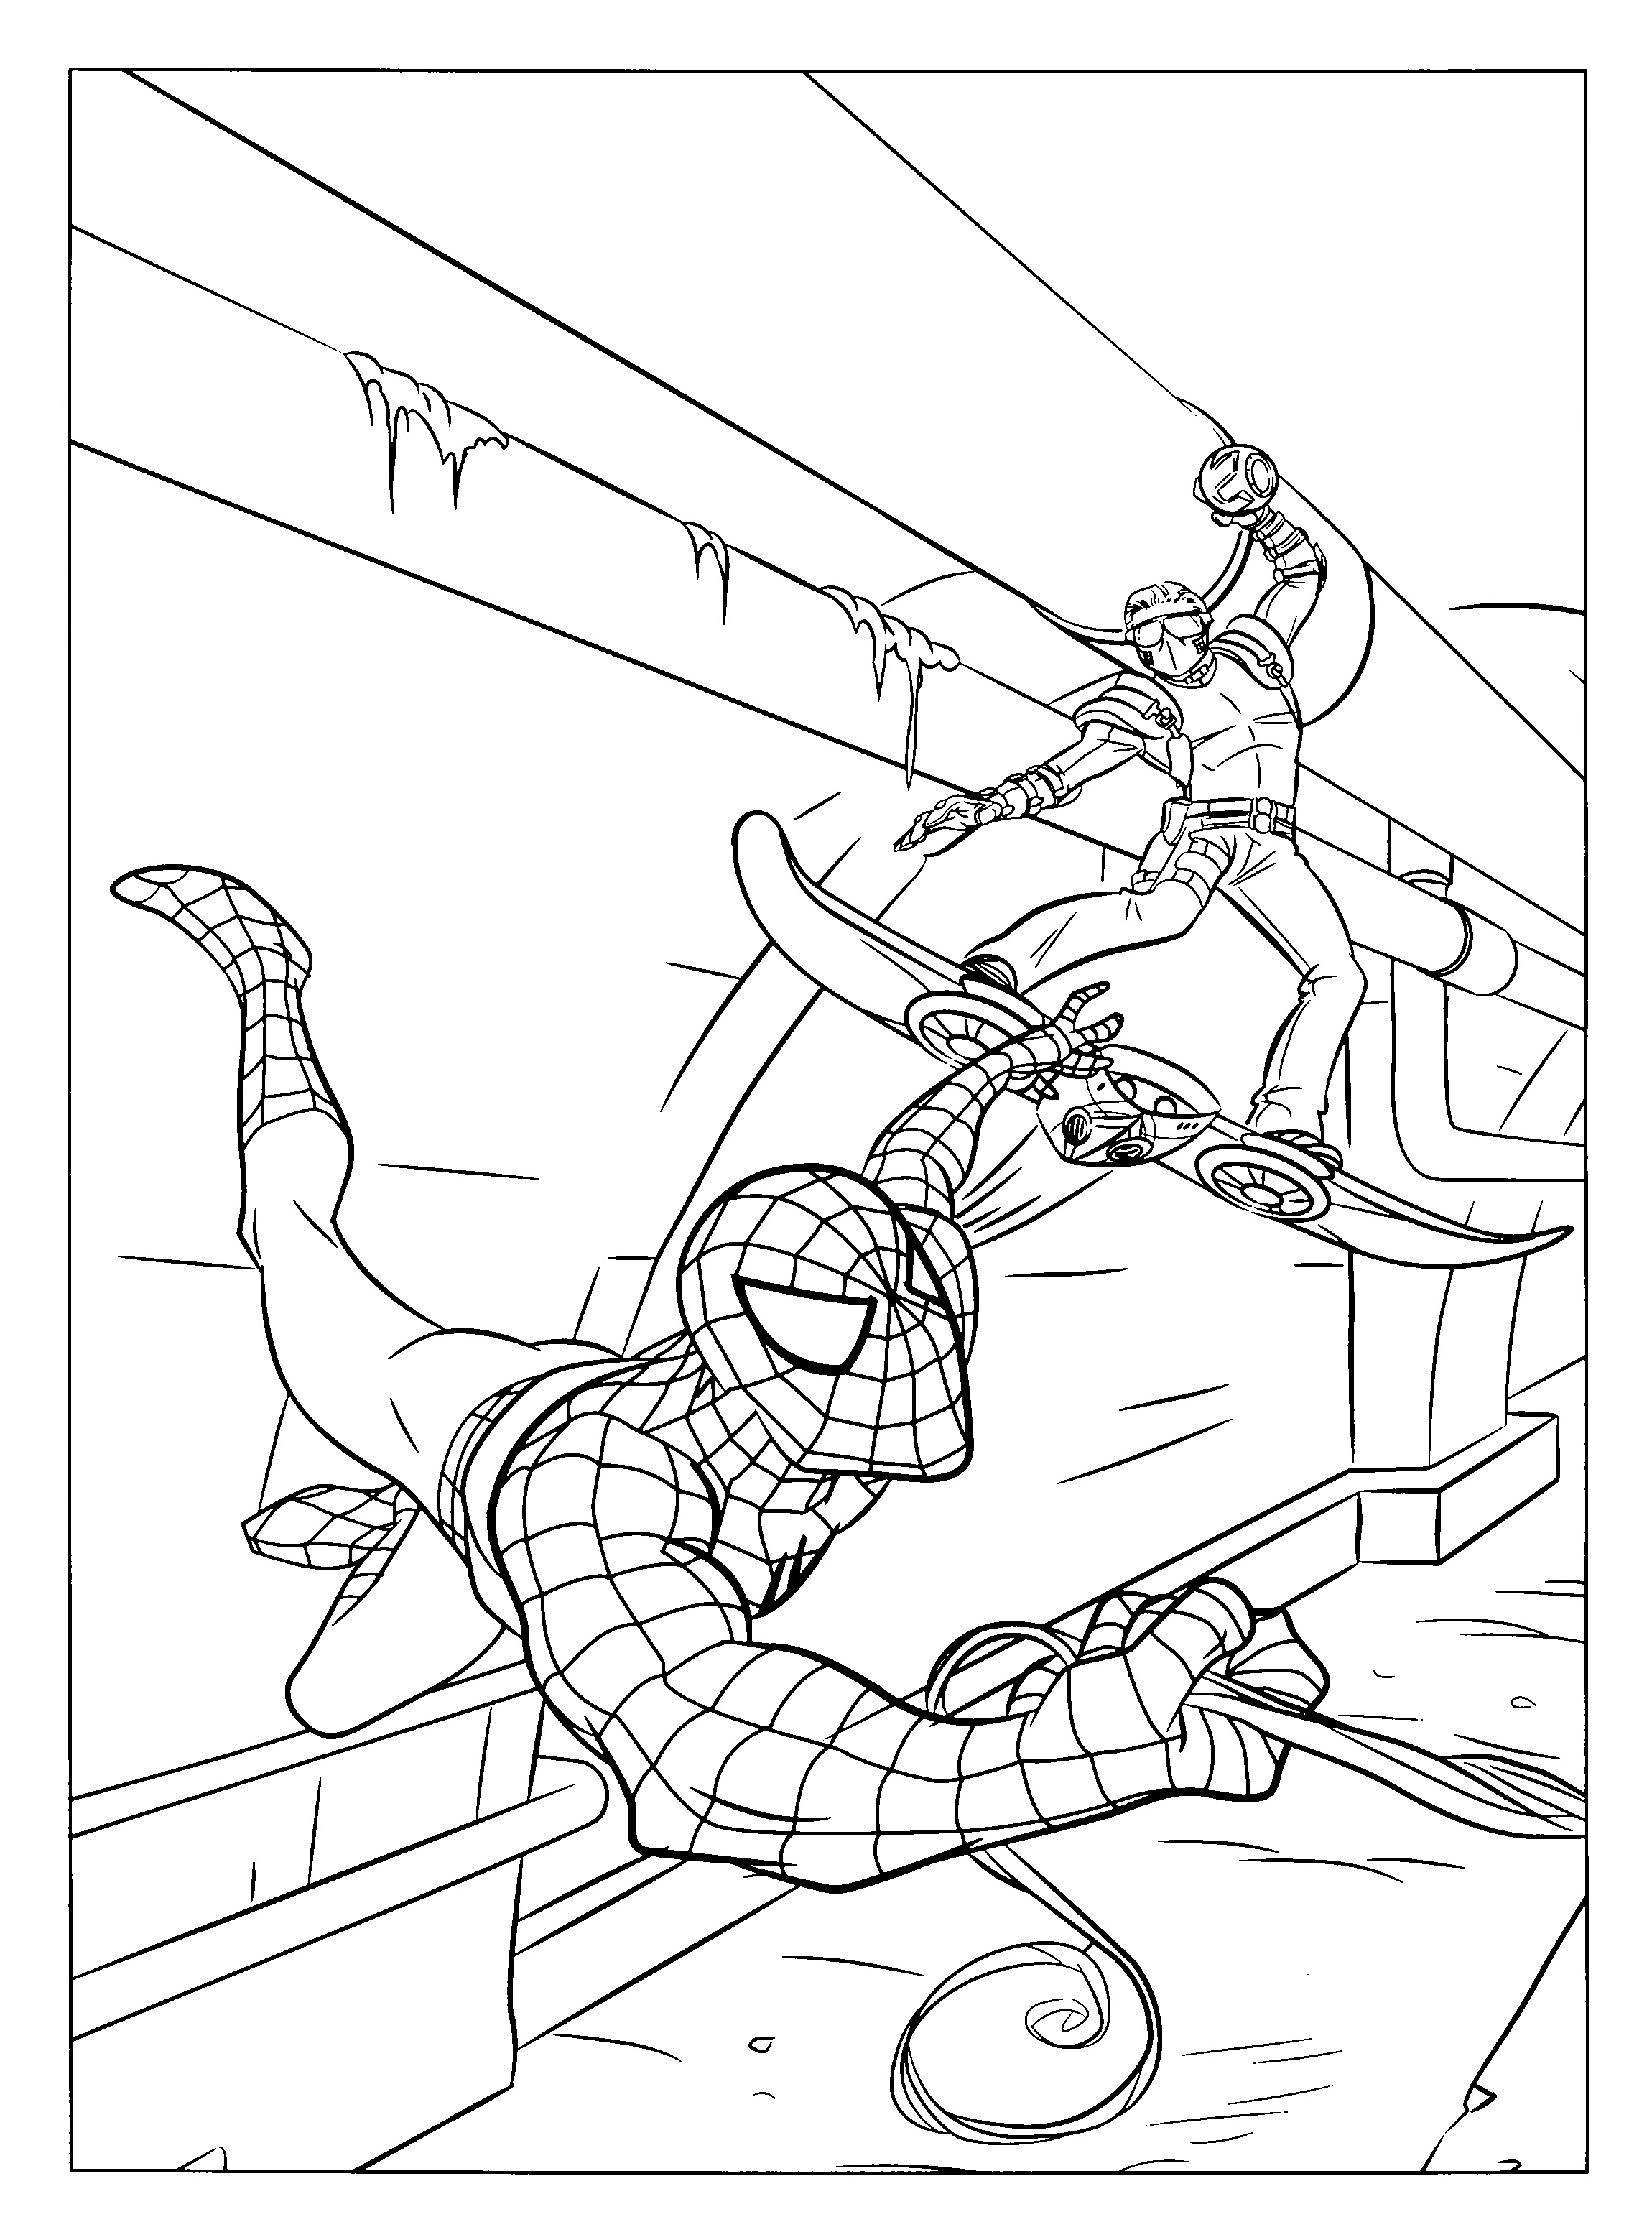 74 Coloring Pages Of Spiderman And Green Goblin For Free